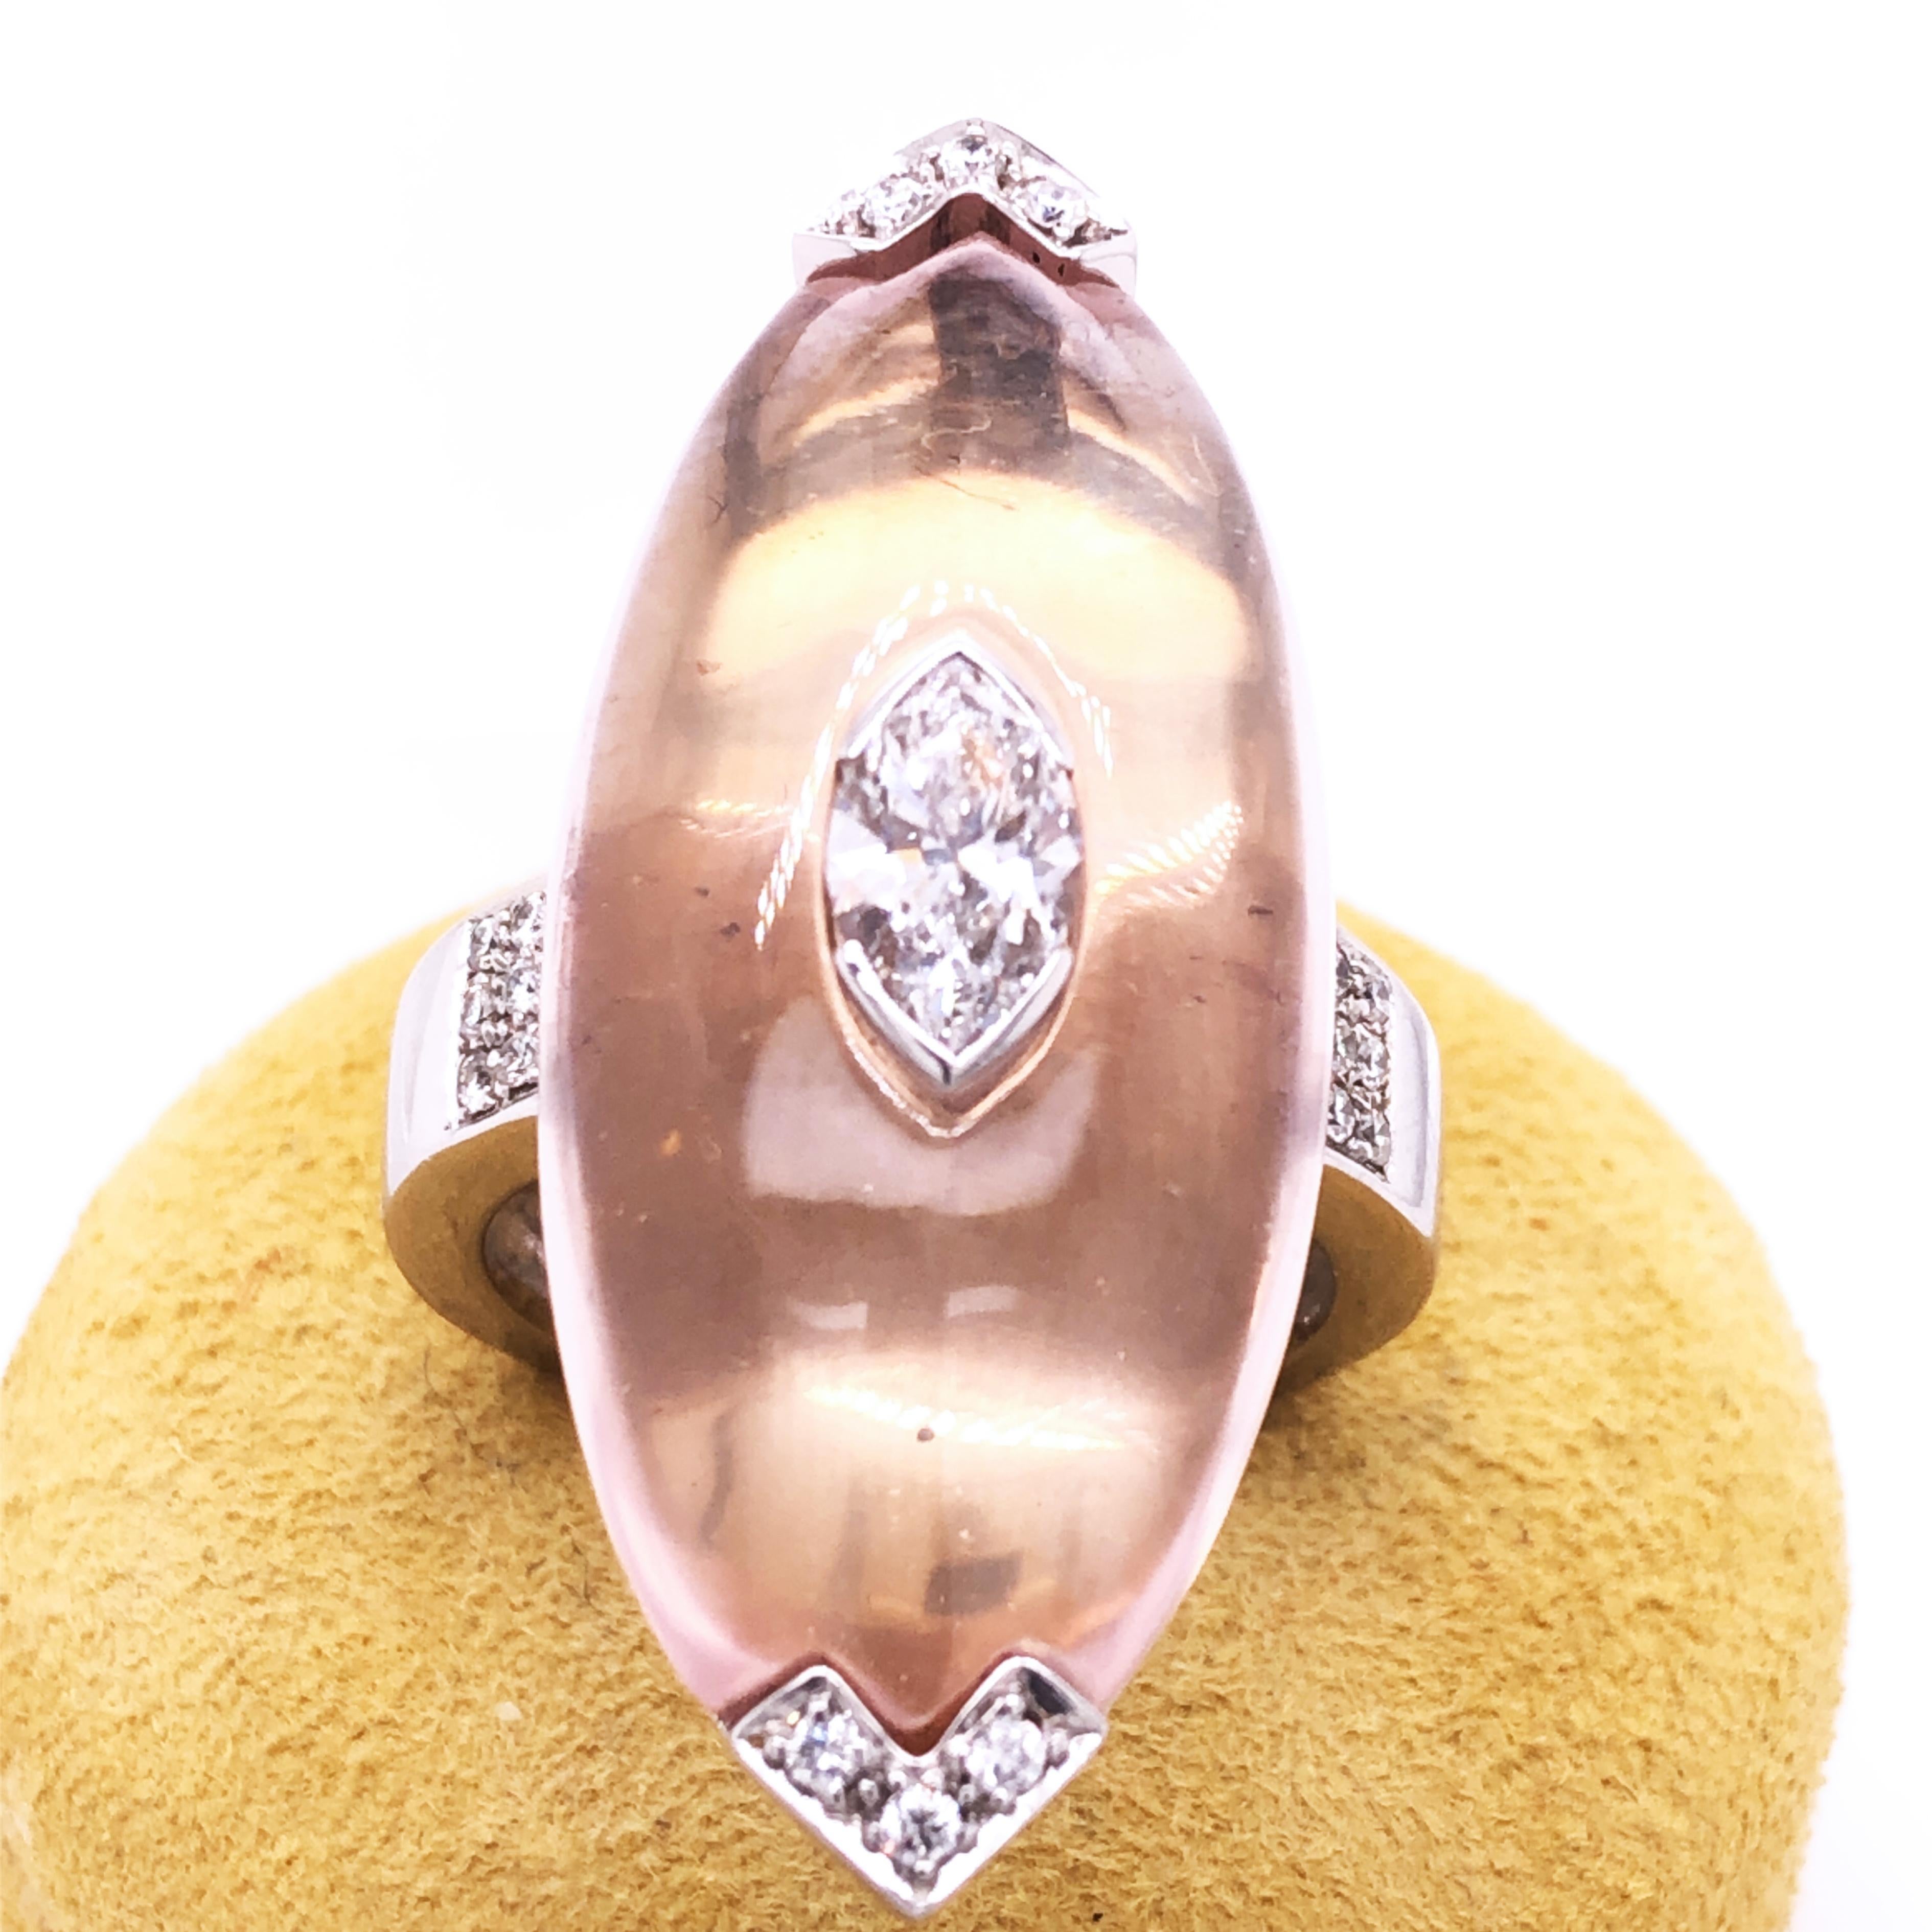 Mesmerizing: One-of-a-kind, absolutely Unique, Chic and Timeless Cocktail Ring Featuring 0.81 Carat Top Quality White Diamond in a 17 Carat Natural Beautifully Hand Inlaid Natural Light Pink Quartz, 18k White Gold Setting. 
A detailed gemmological